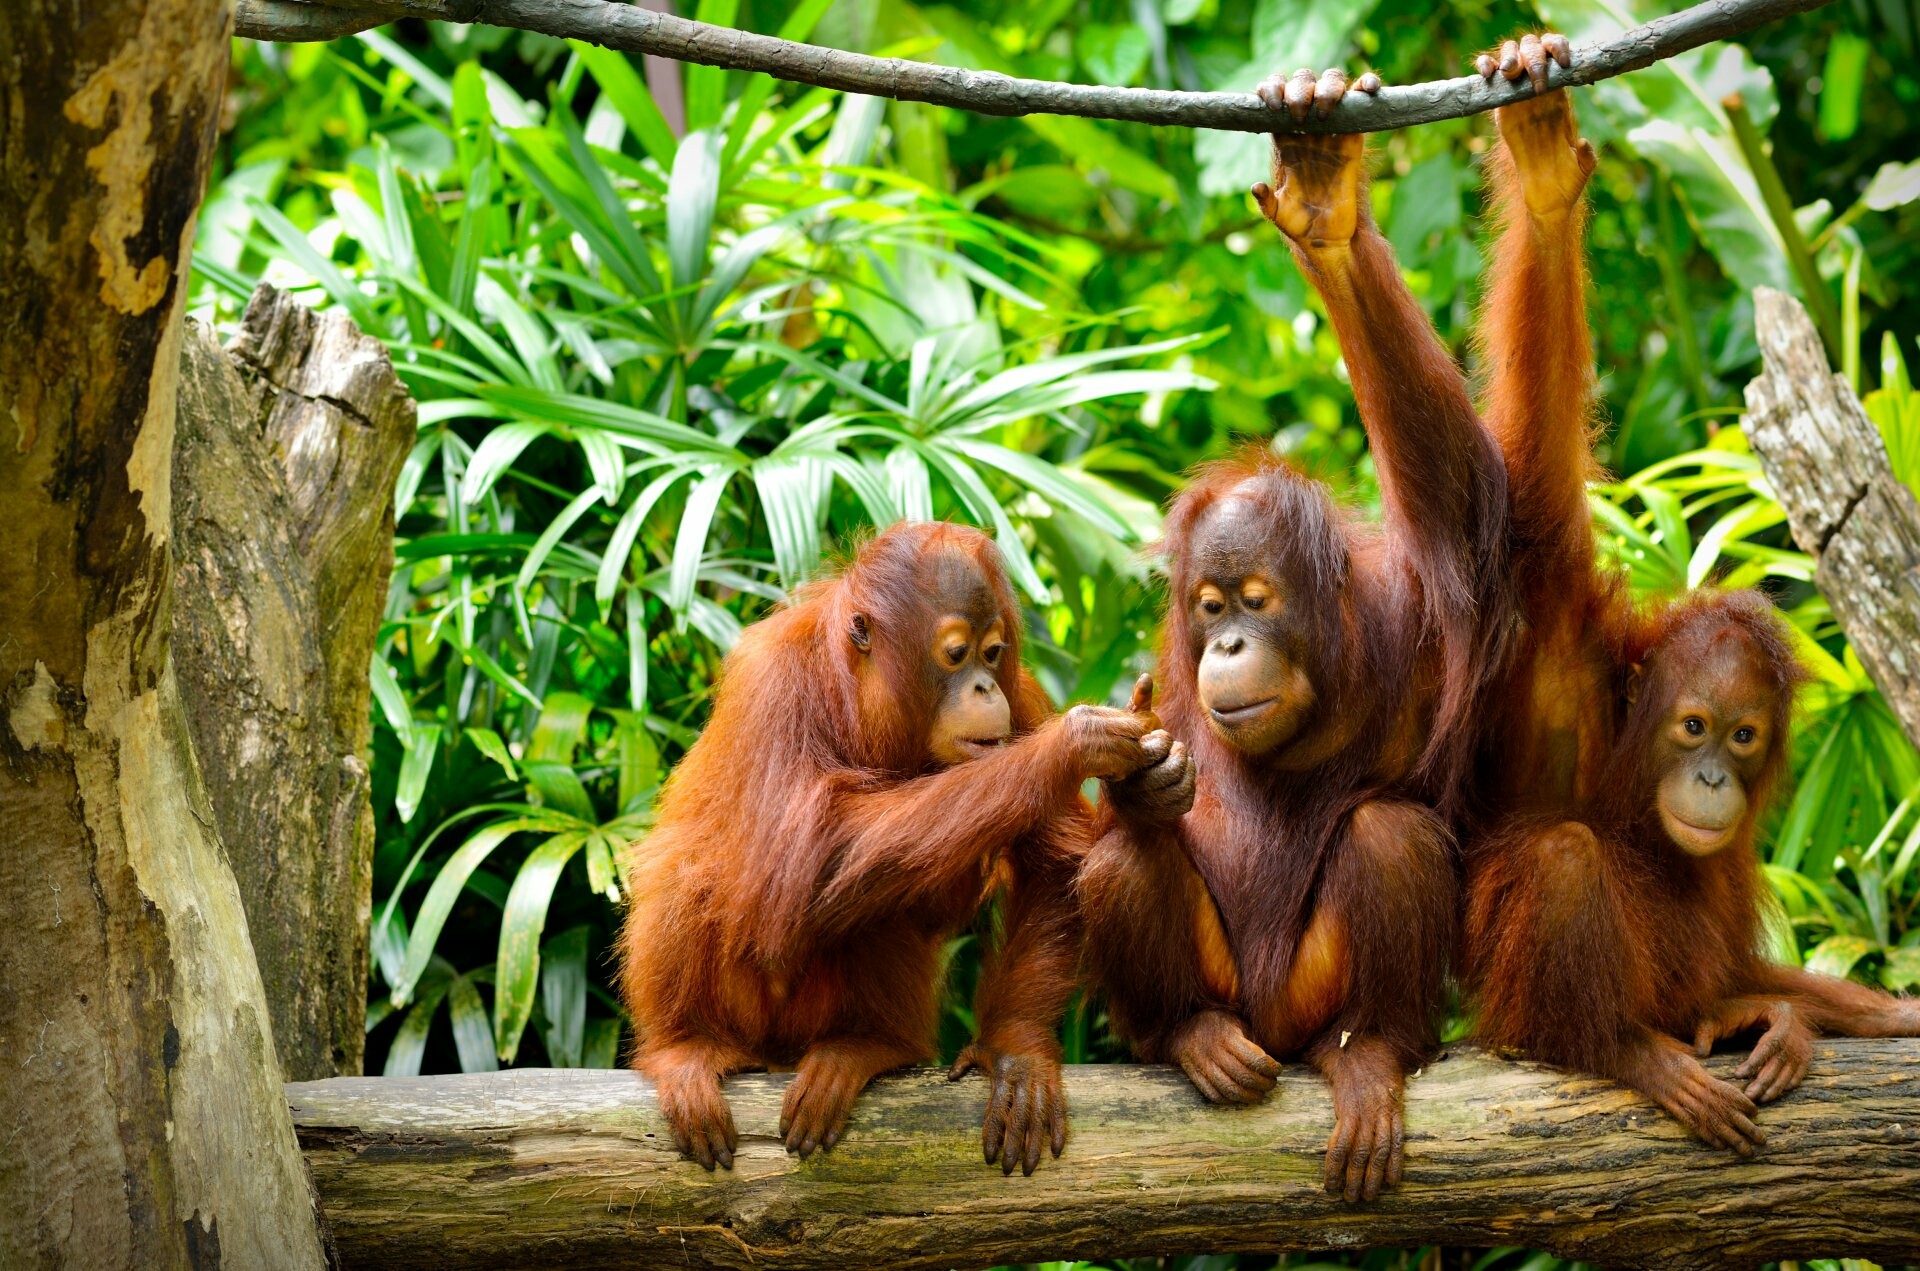 Ape: Orangutans are the largest arboreal mammals and the most socially solitary of the great apes. 1920x1280 HD Wallpaper.